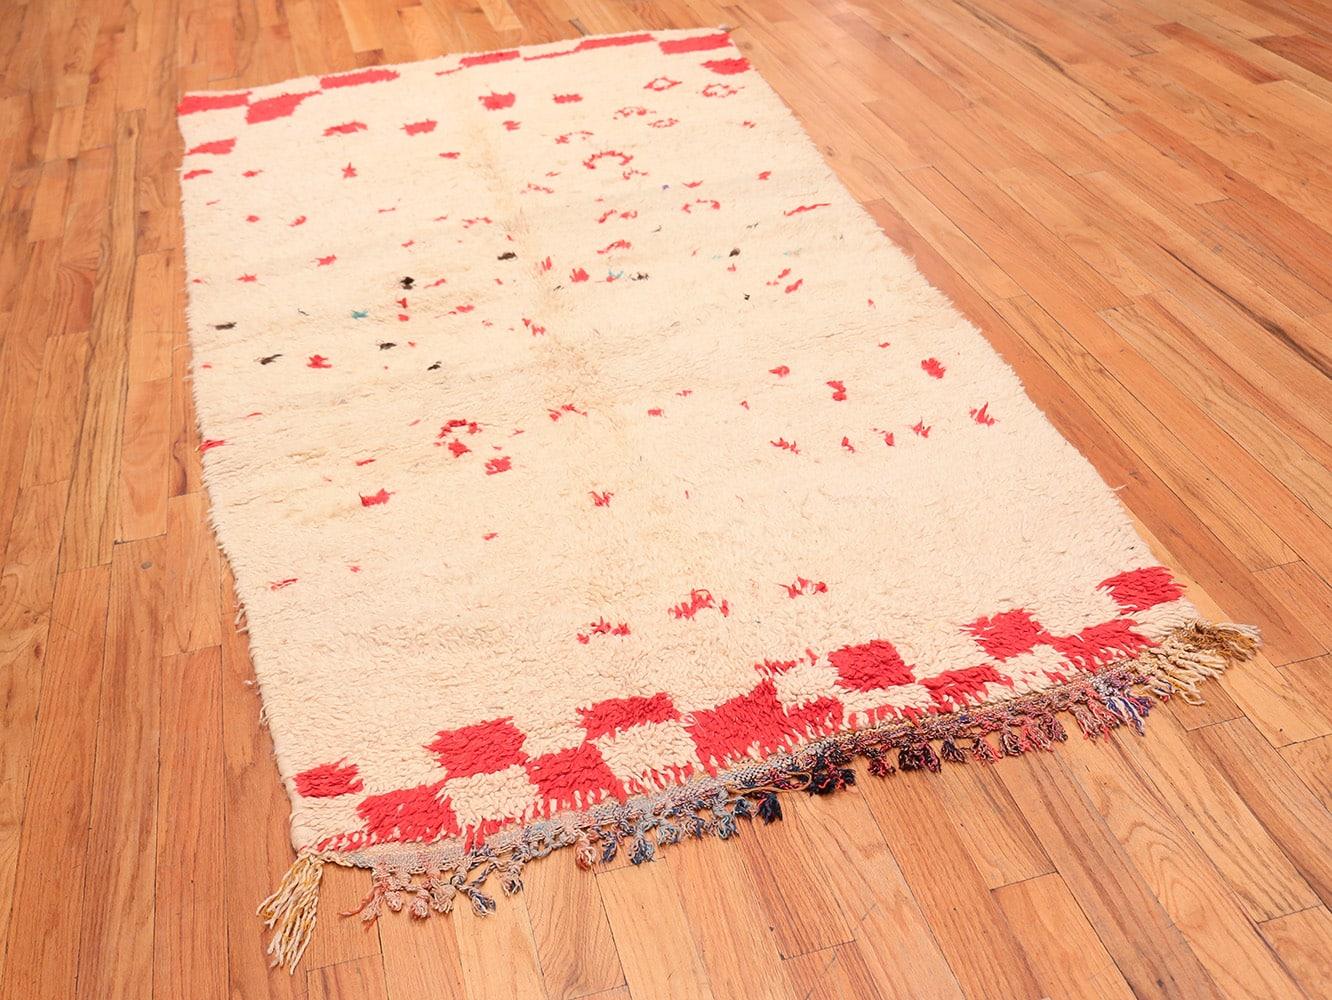 Hand-Knotted Ivory and Red Vintage Moroccan Rug. Size: 4 ft 7 in x 9 ft (1.4 m x 2.74 m)